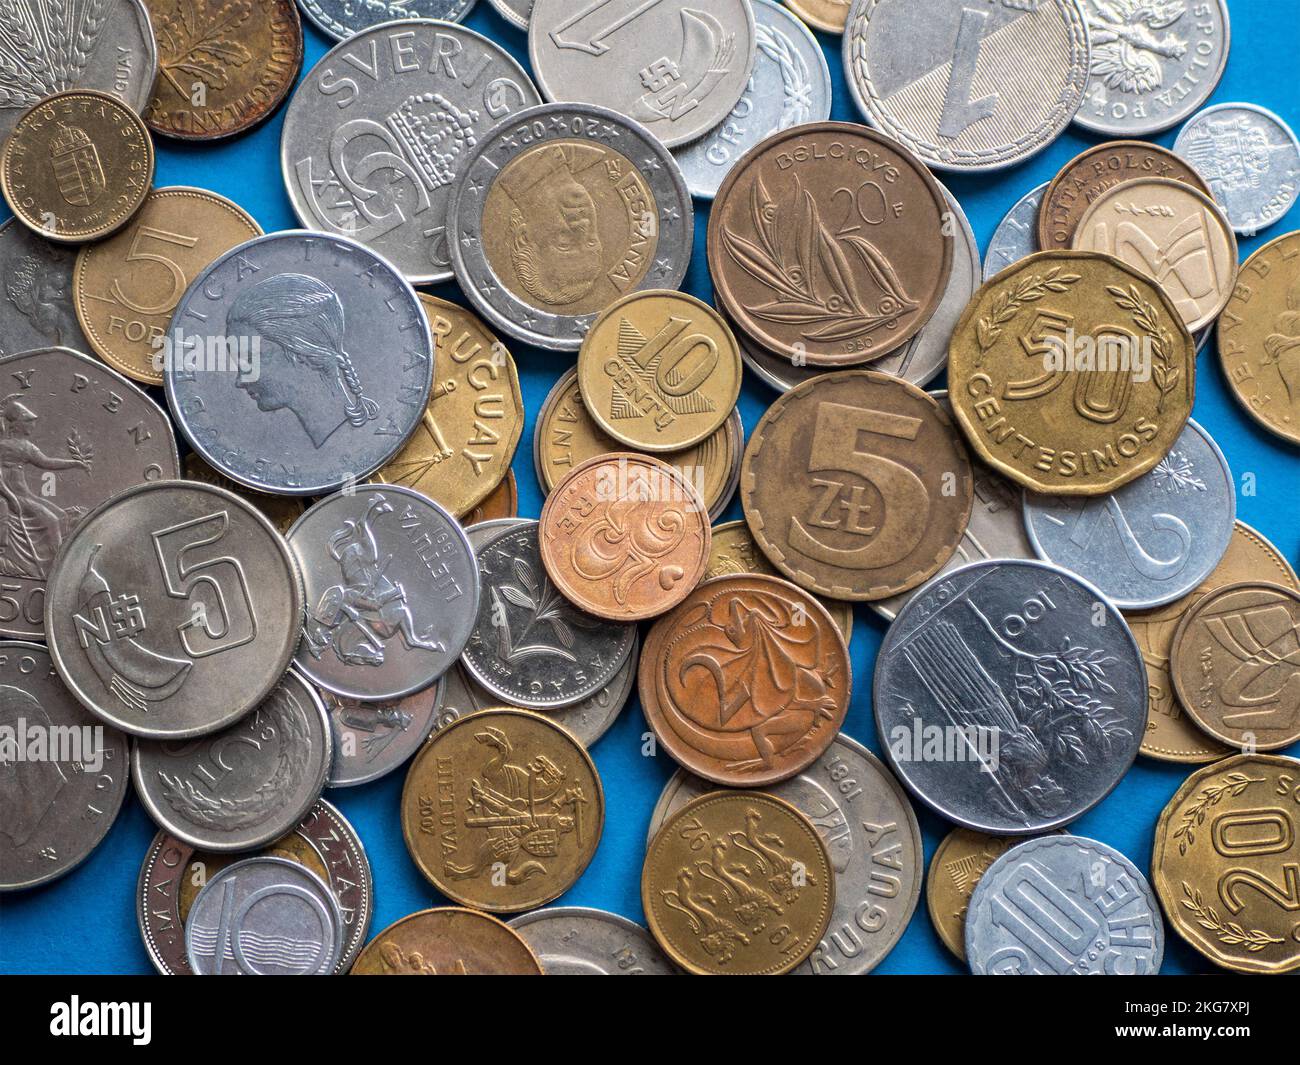 Heap of old and modern international coins, close up. Concept of numismatics, coin collection, form of hobby Stock Photo